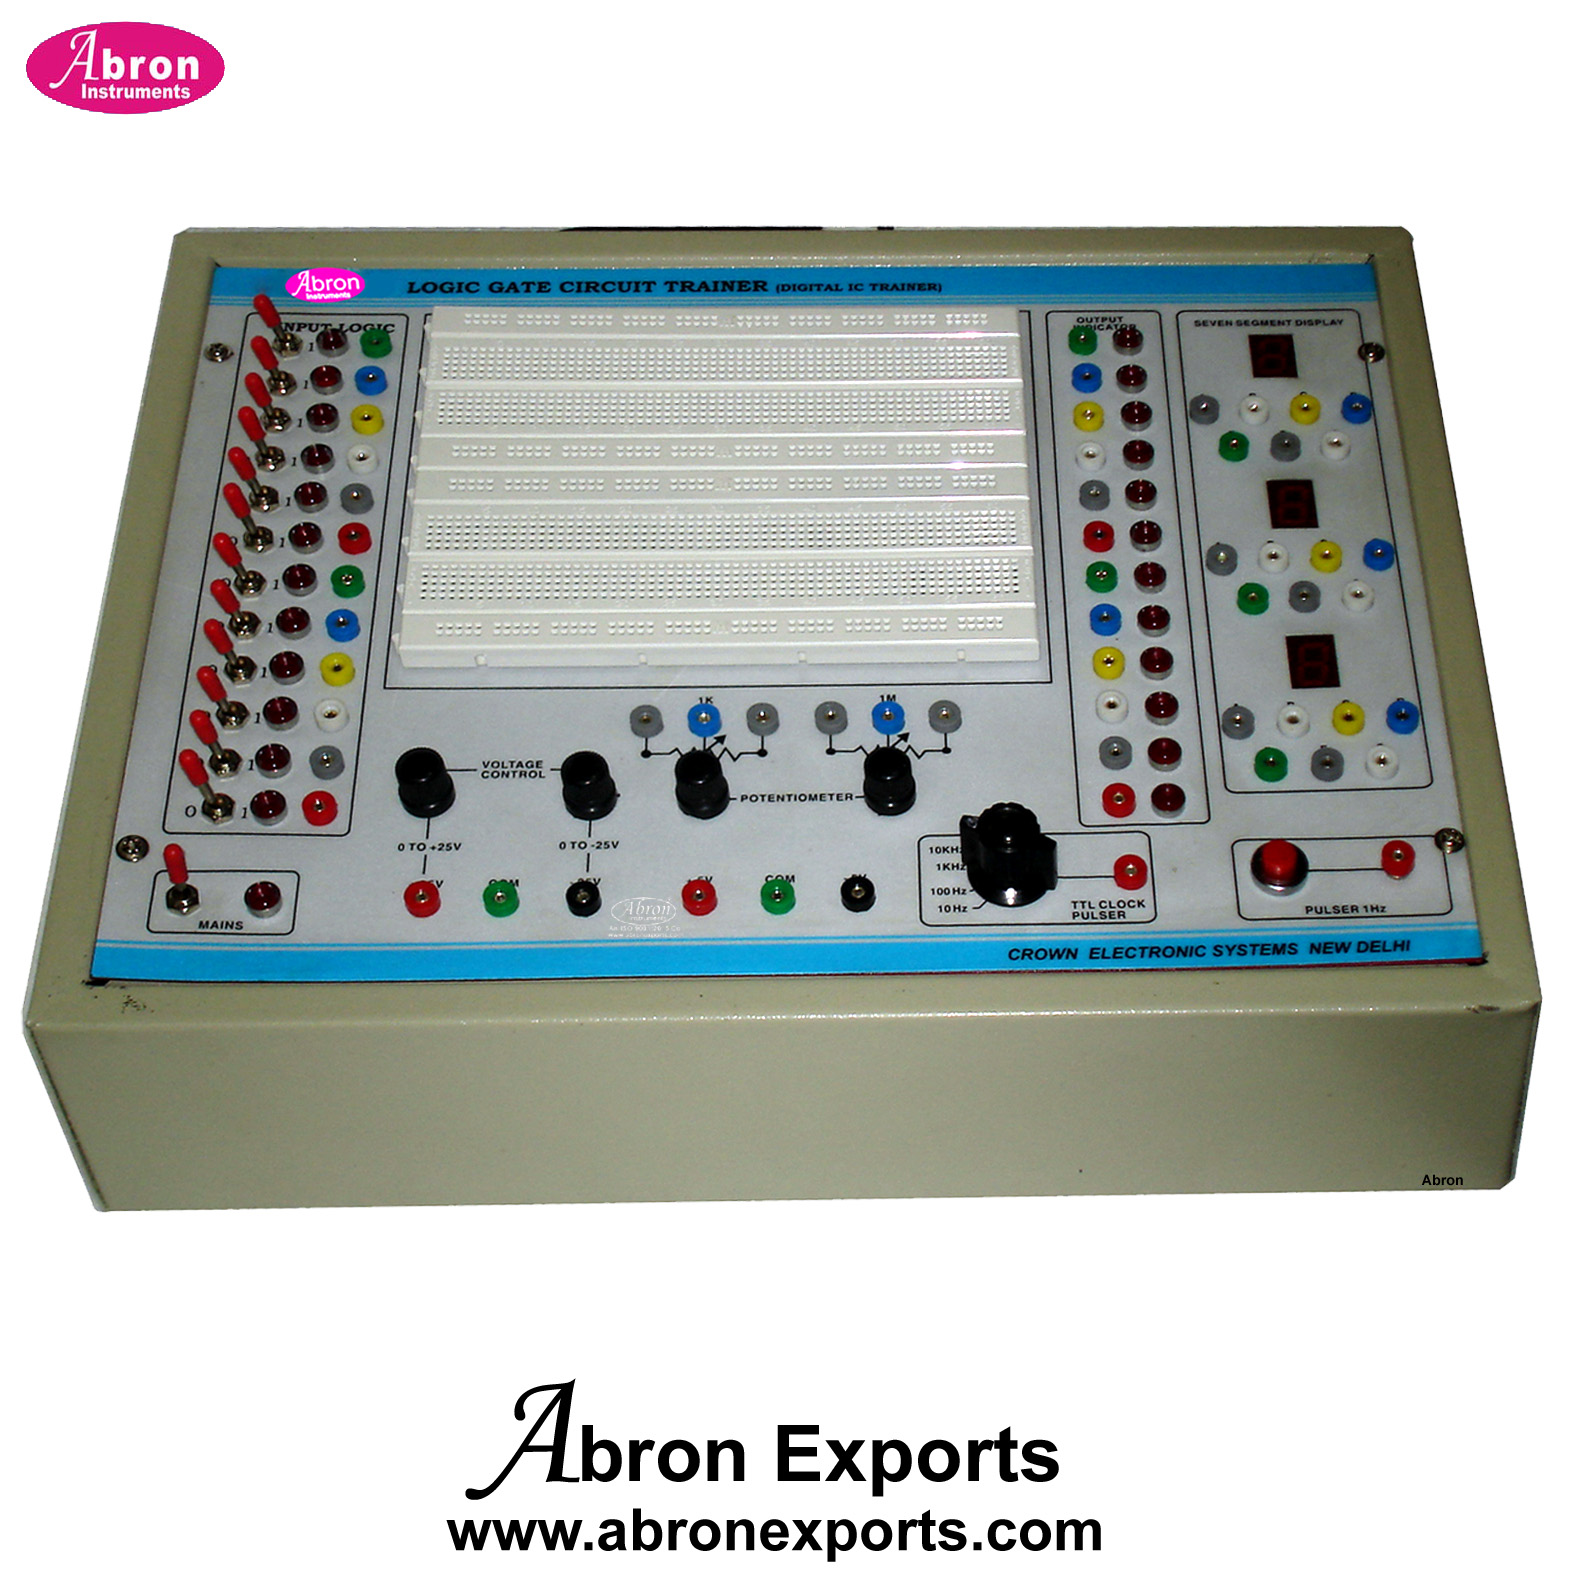 Computer Digital IC Trainer With Bread Board Sockets Educational Trainer  Pulse Generator Input Output LED Sockets +12v-12VDC Power Supply Abron AE-1233A